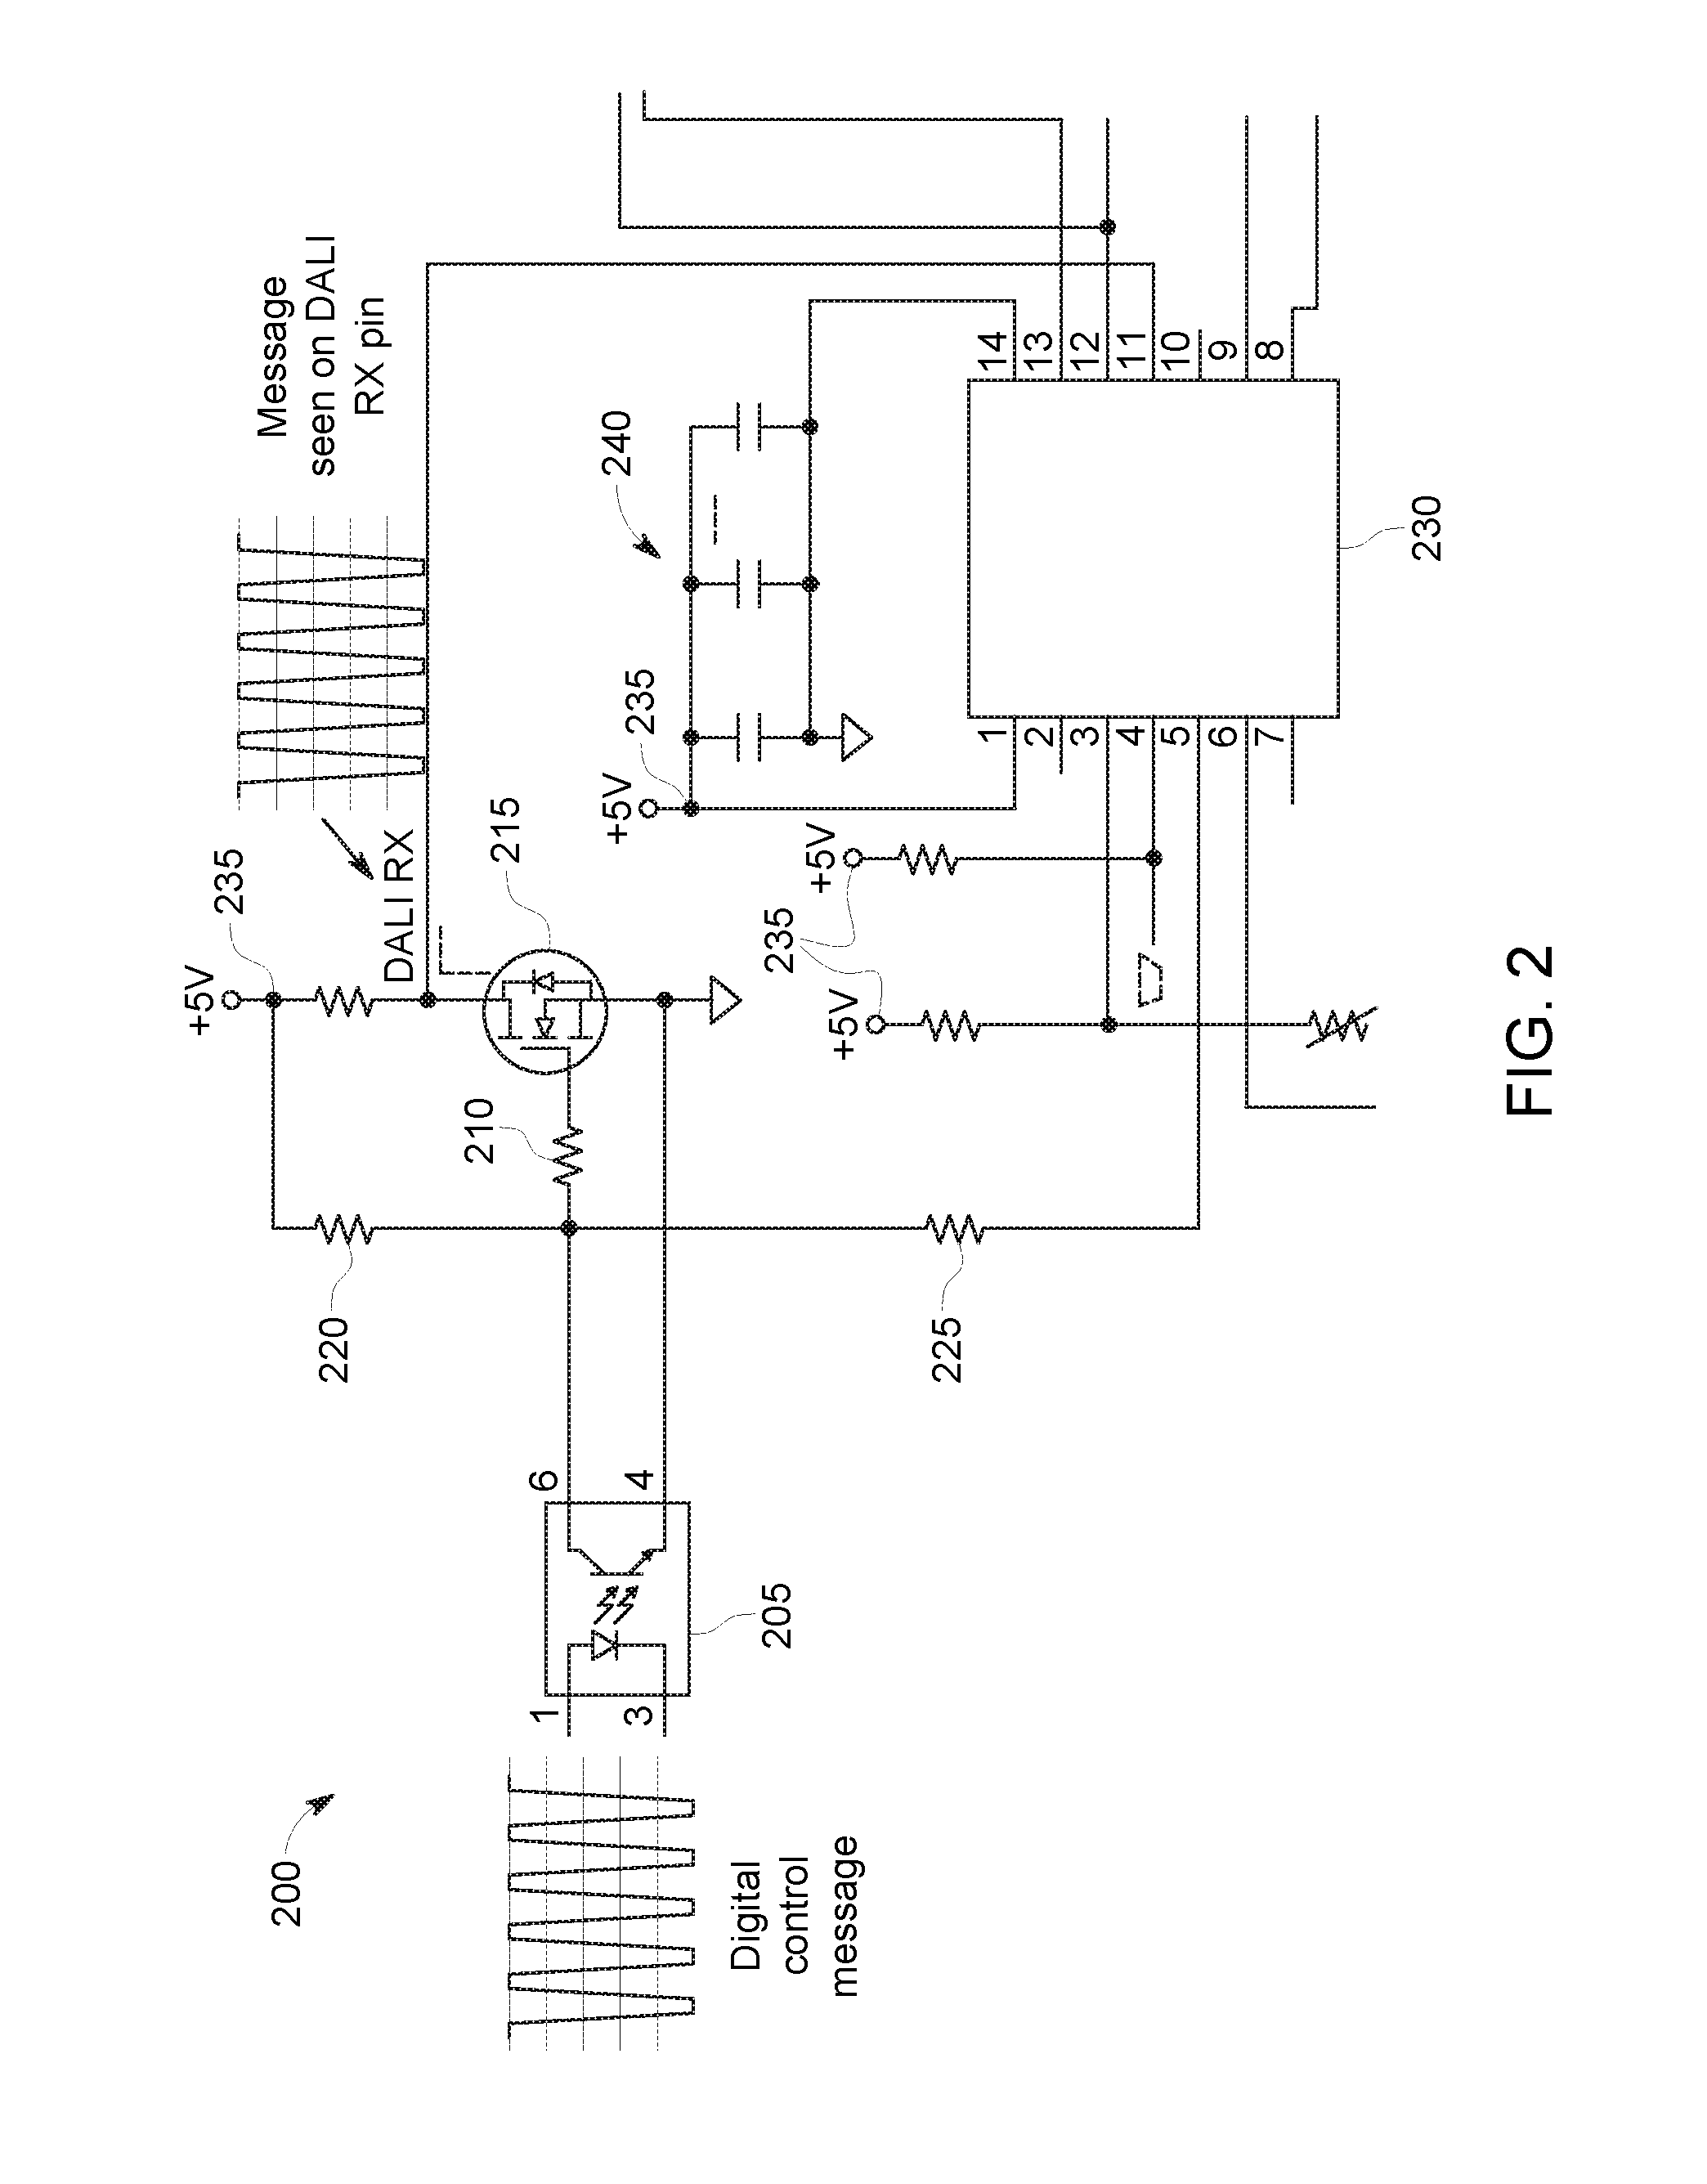 Method and system for lighting interface messaging with reduced power consumption